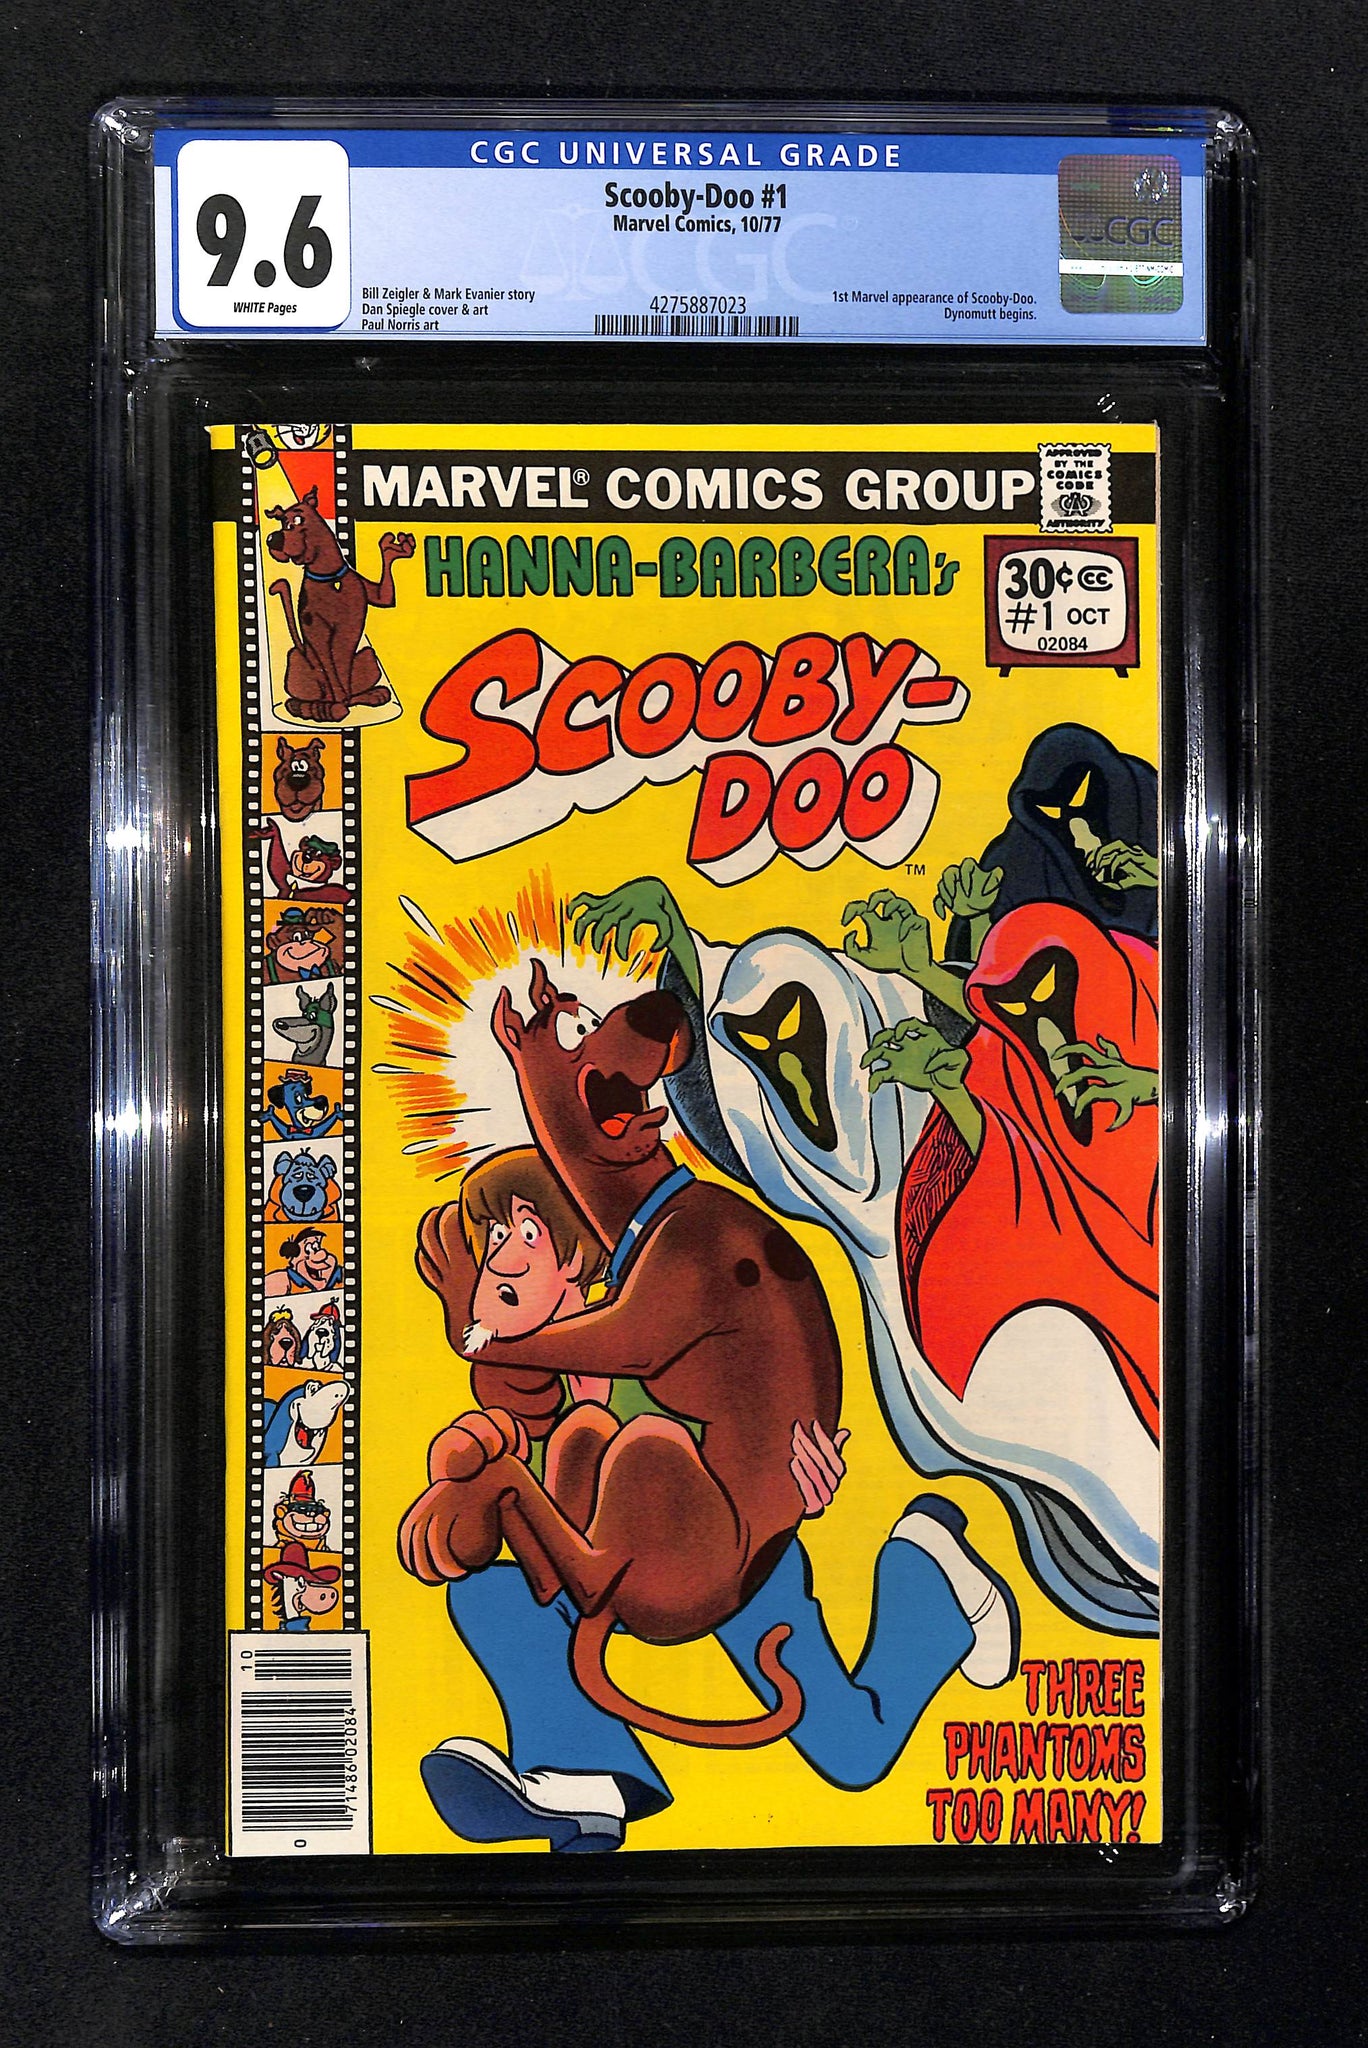 Scooby-Doo #1 CGC 9.6 1st Marvel appearance of Scooby-Doo